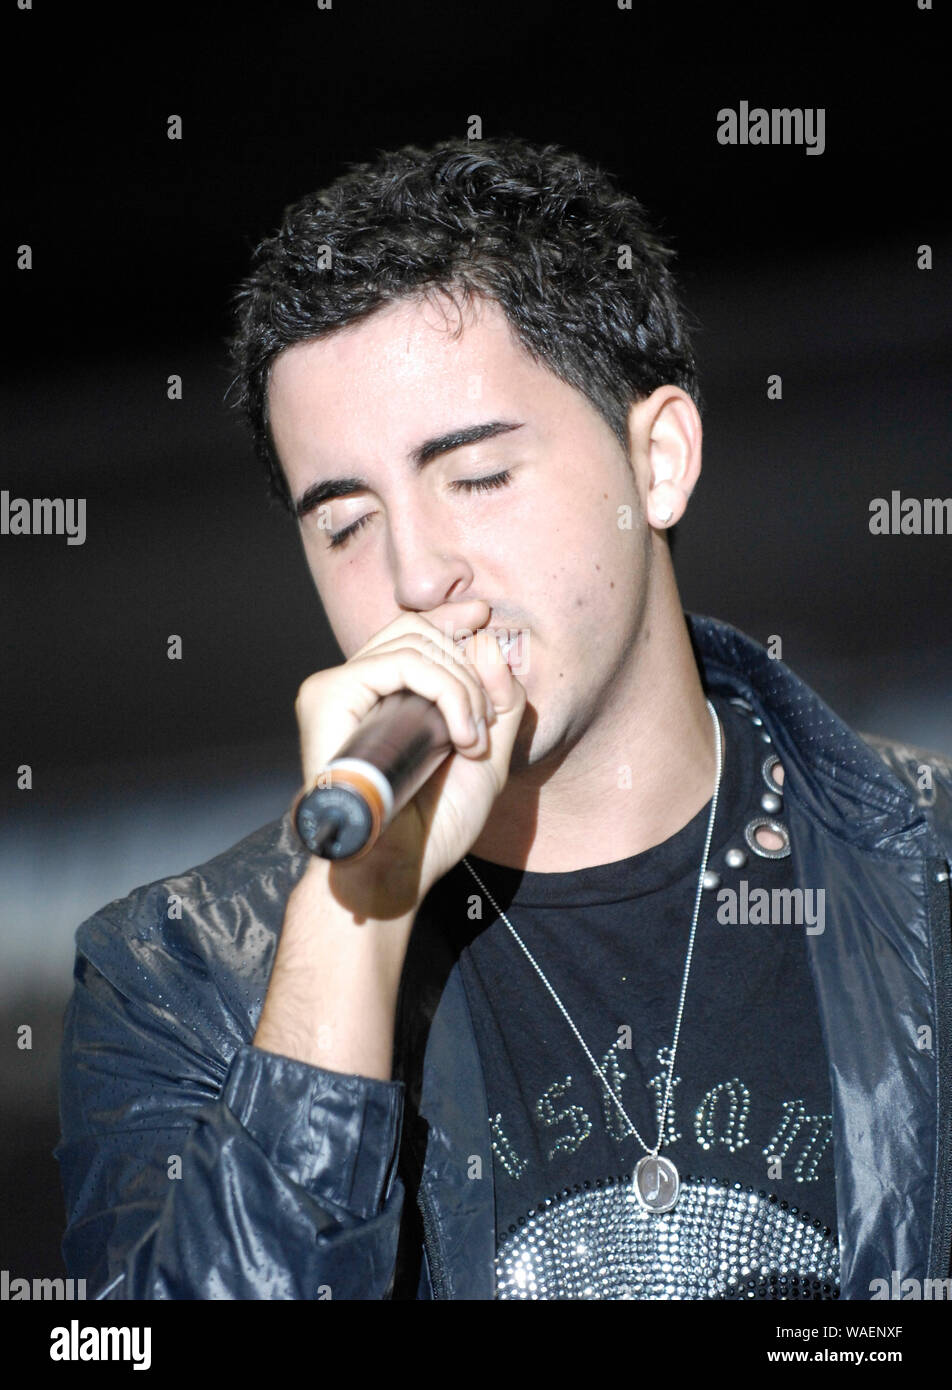 Singer Colby O'Donis performs at the Dub Show in Los Angeles, California. Stock Photo